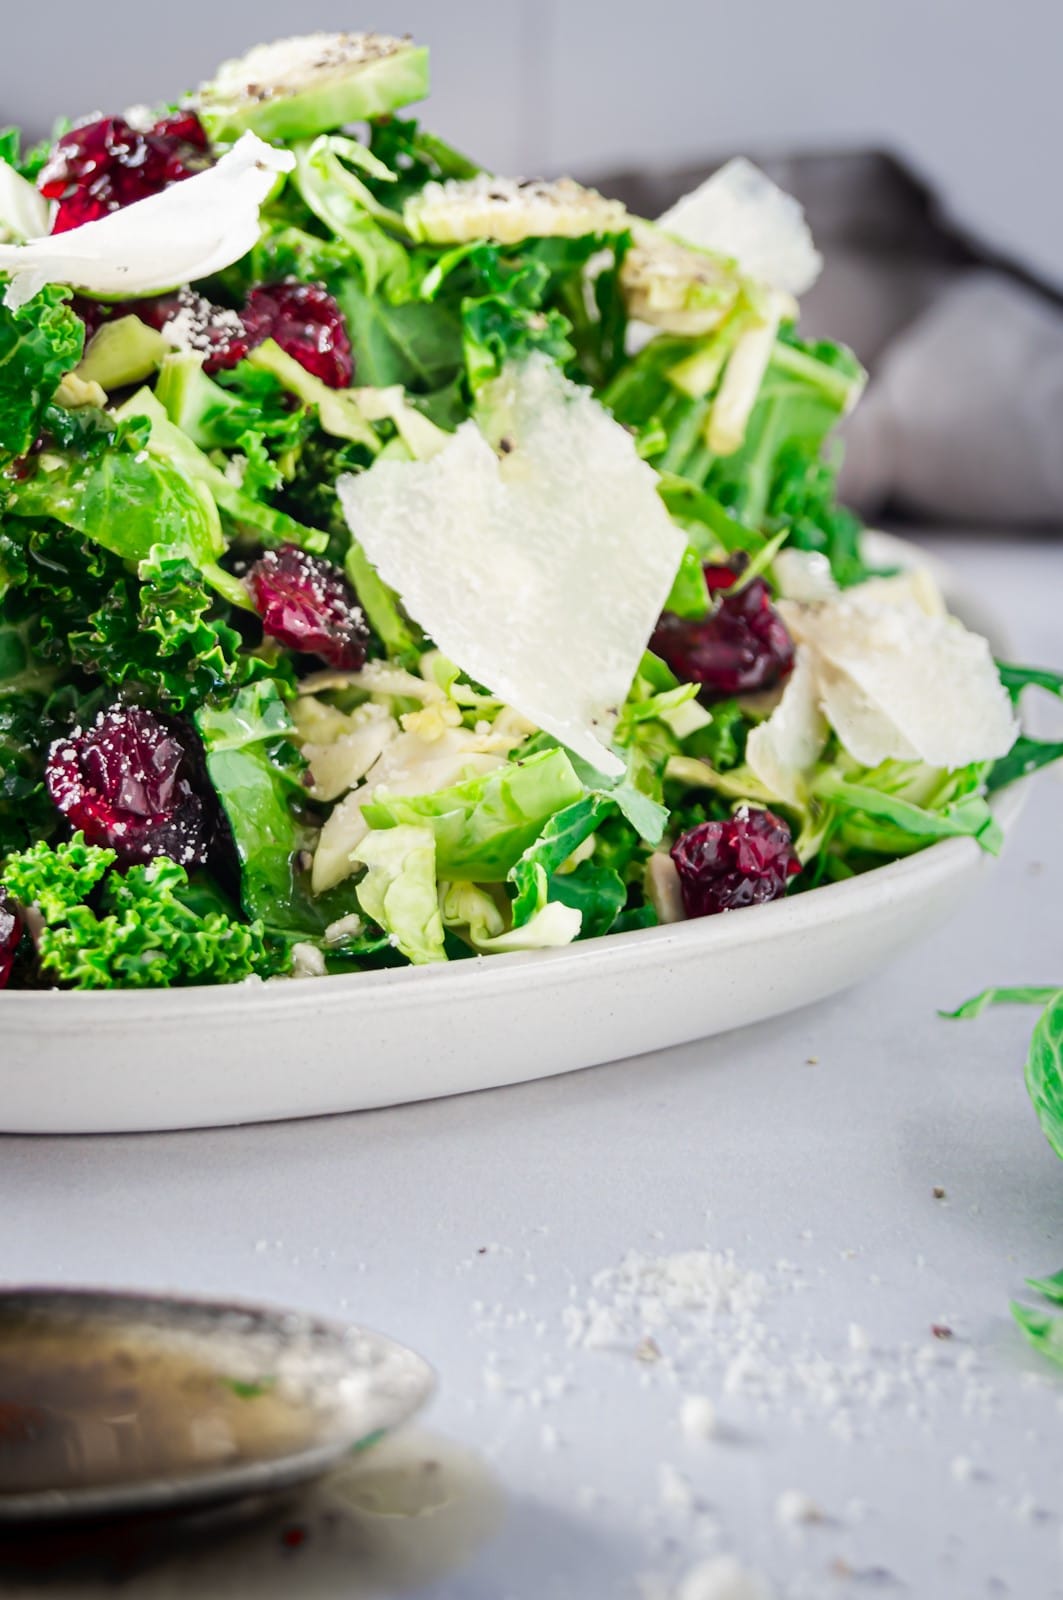 Kale and brussel sprout salad with cranberries and romano cheese